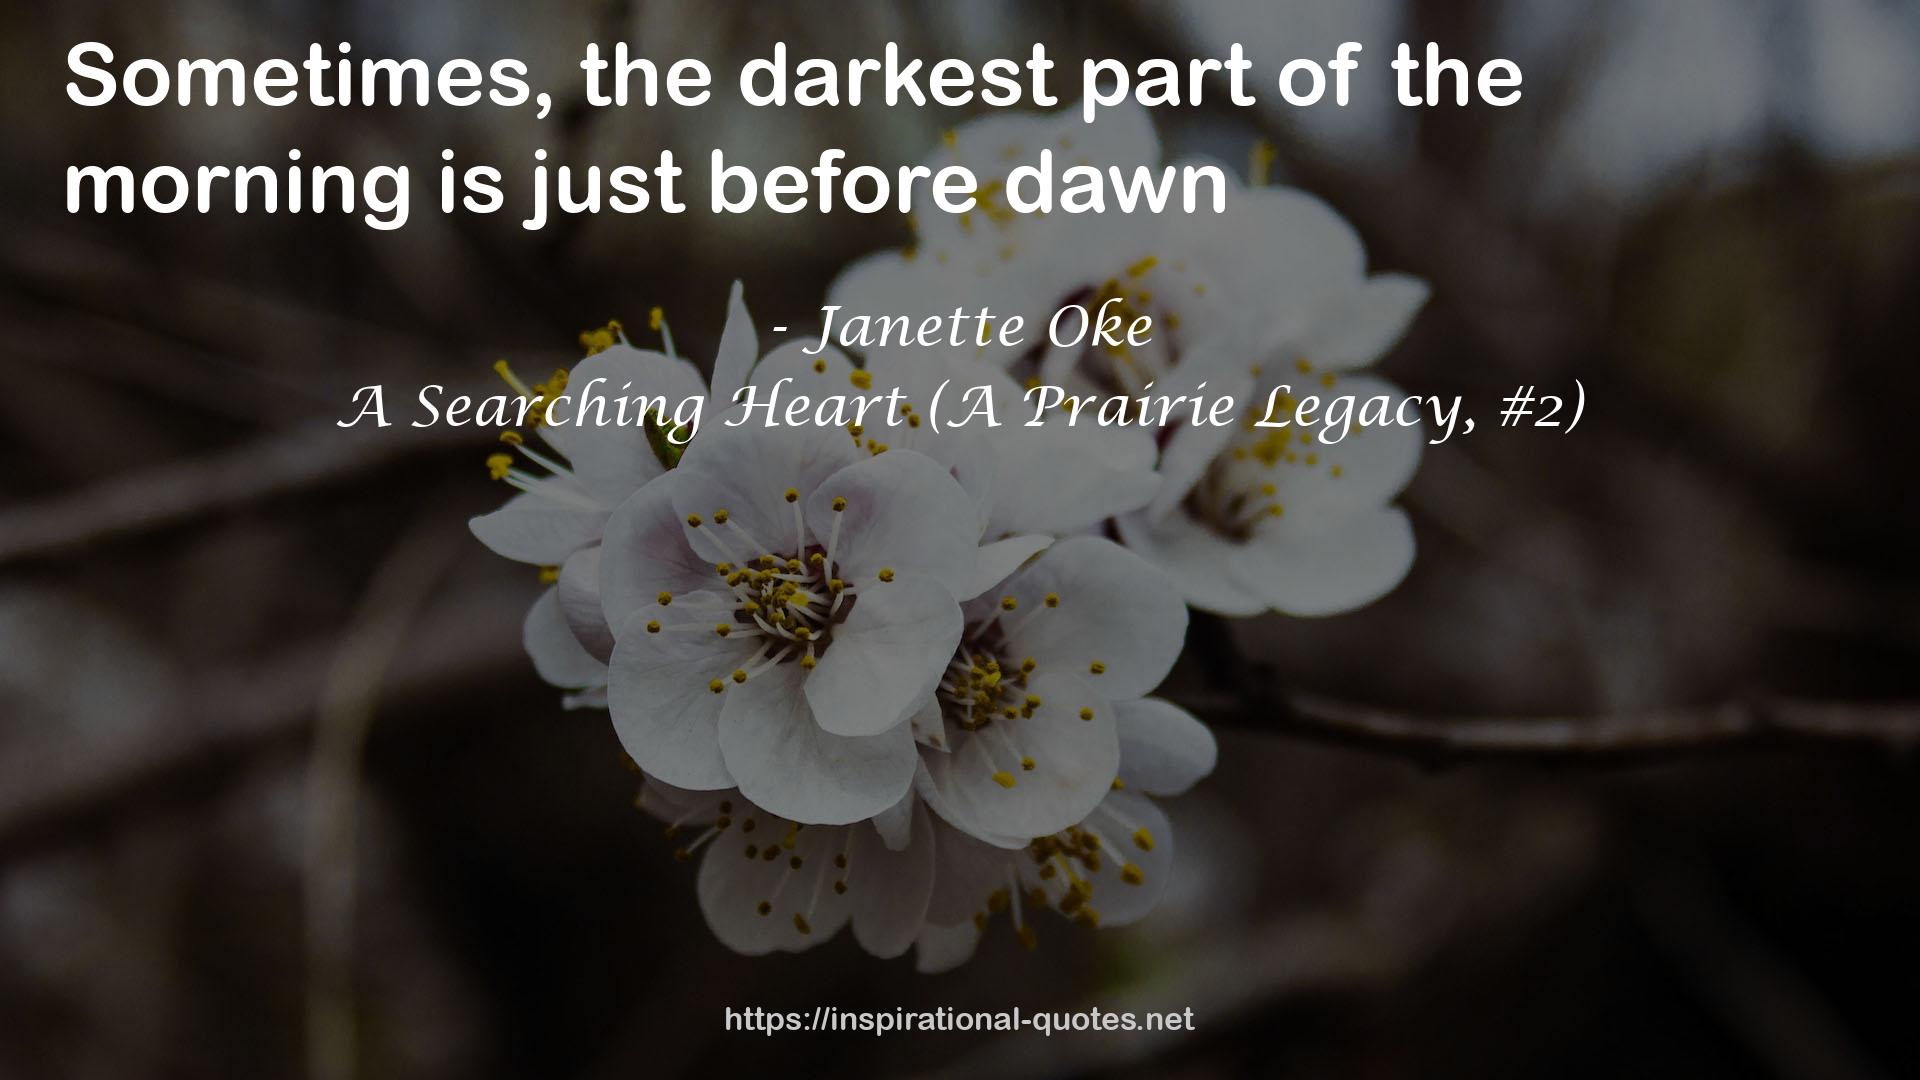 A Searching Heart (A Prairie Legacy, #2) QUOTES